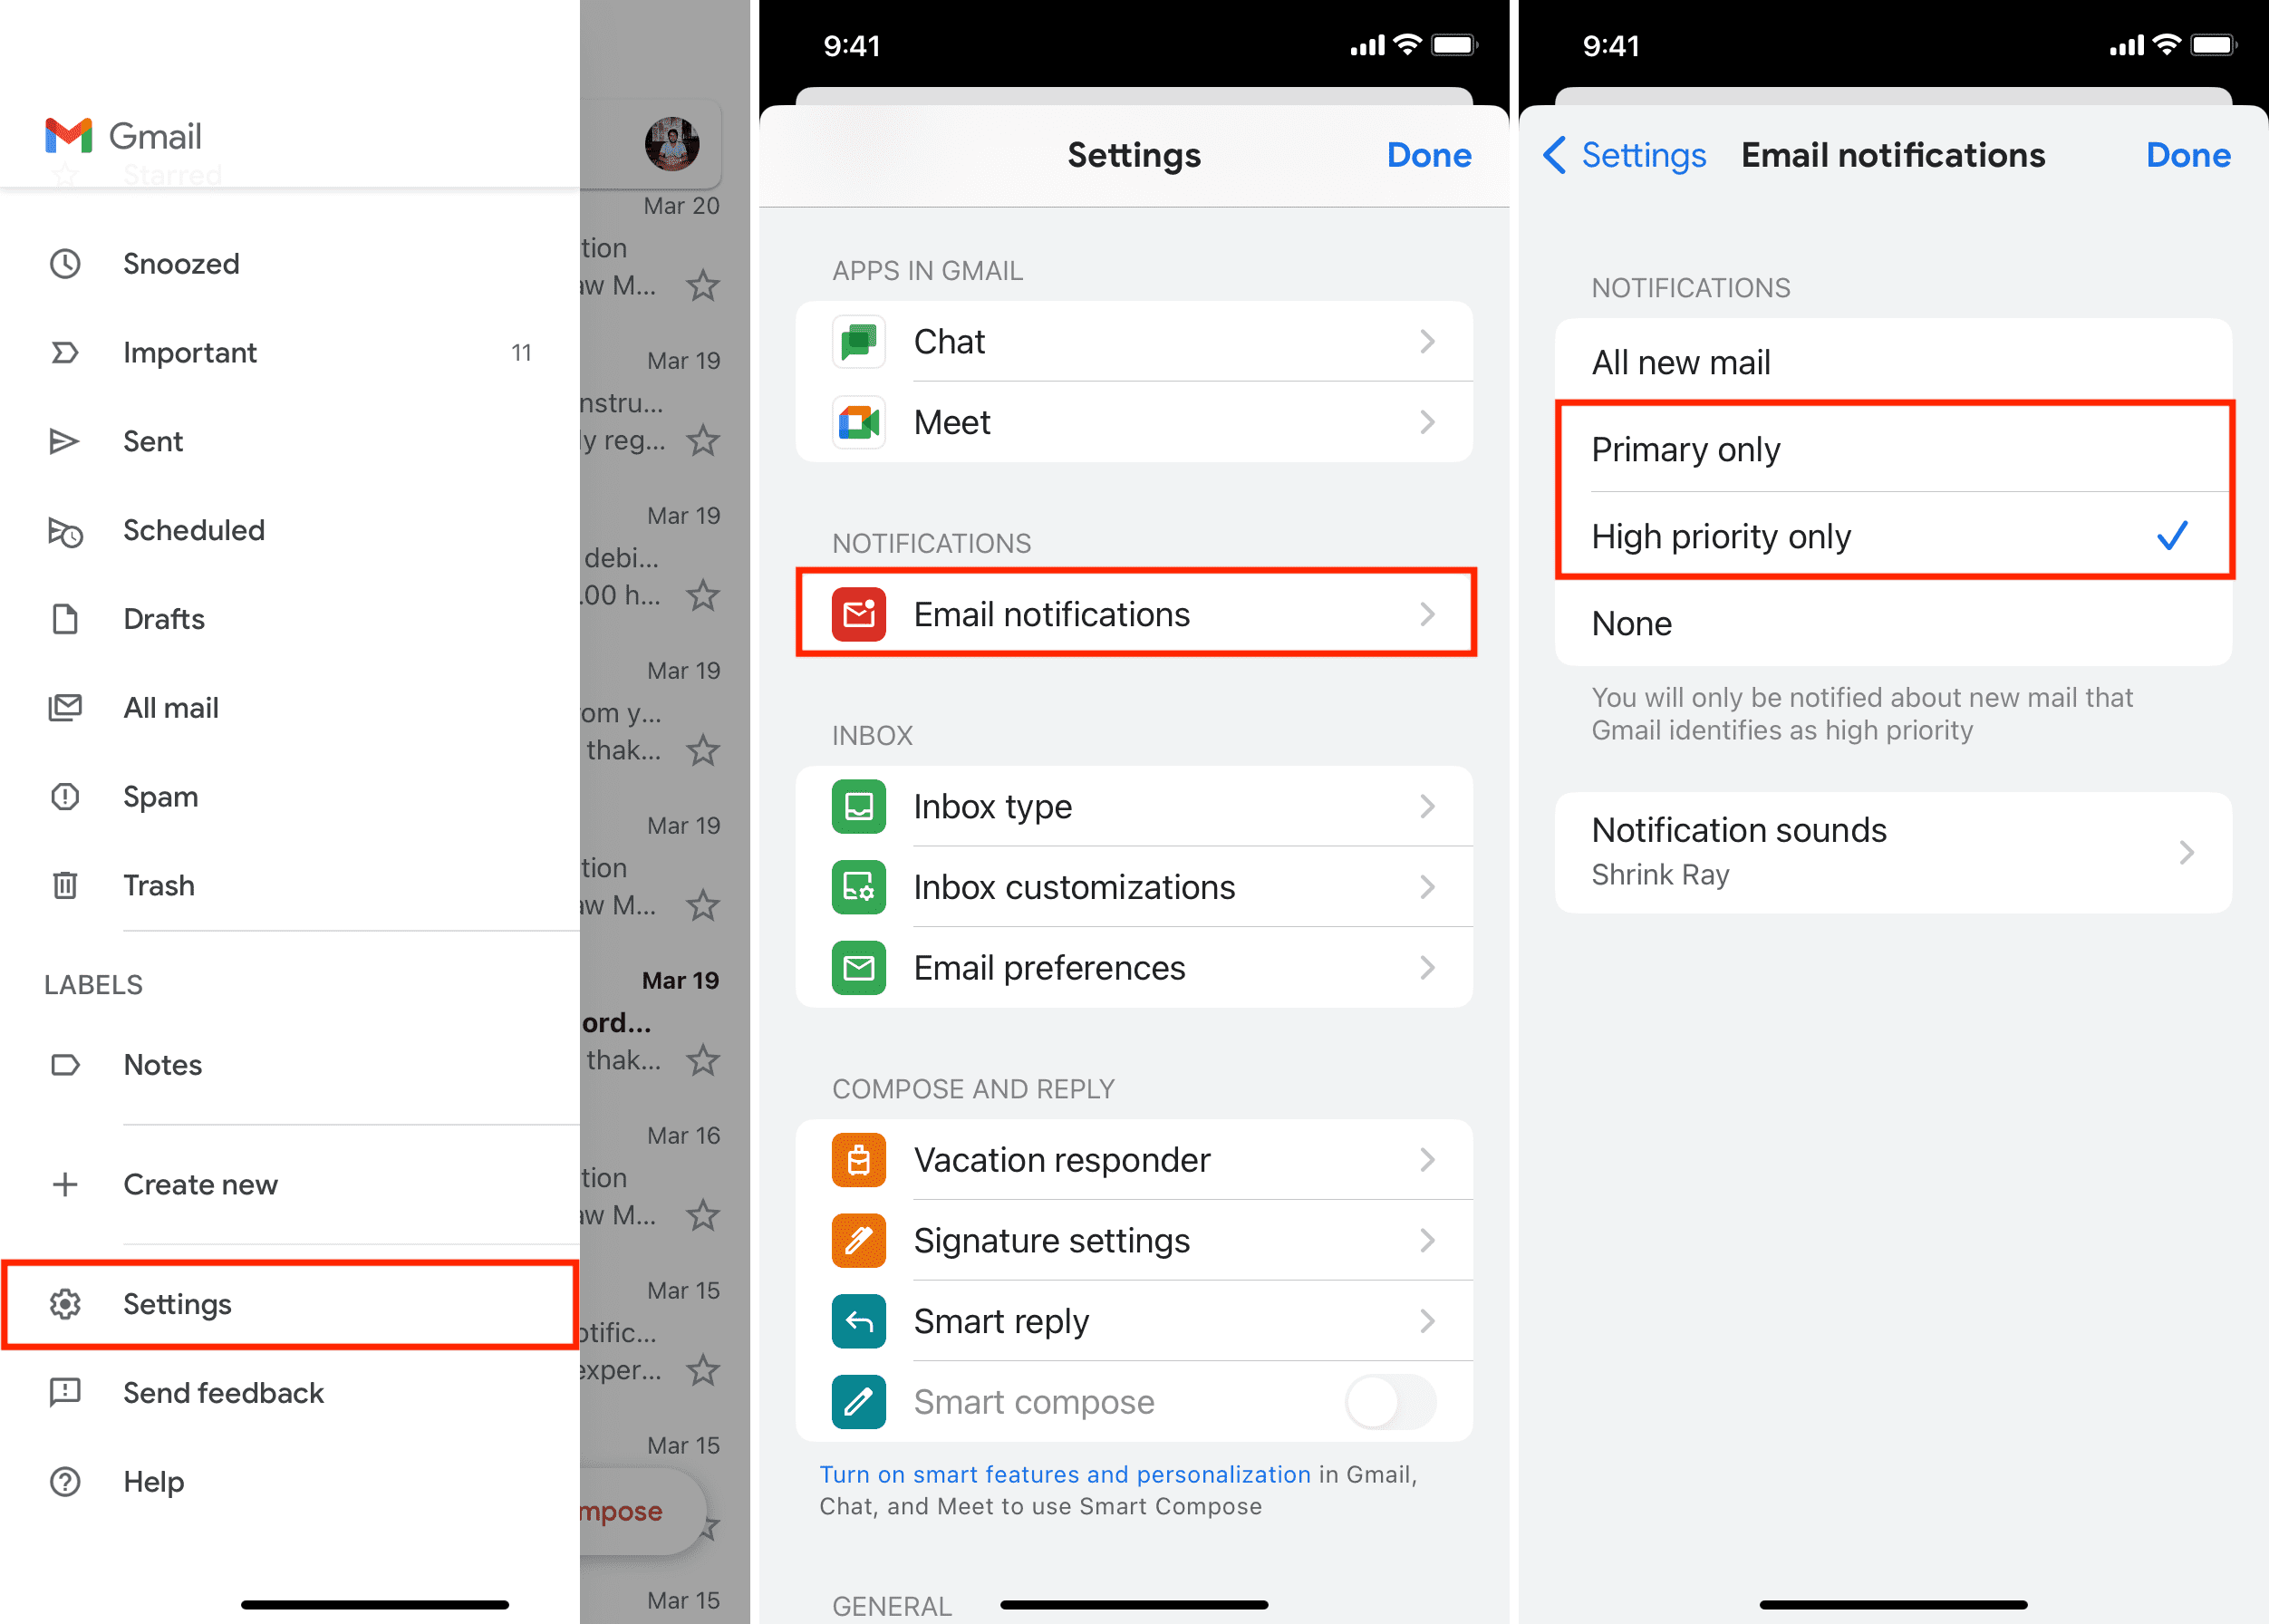 Customize email notifications for Gmail app on iPhone to cut down spam notifications